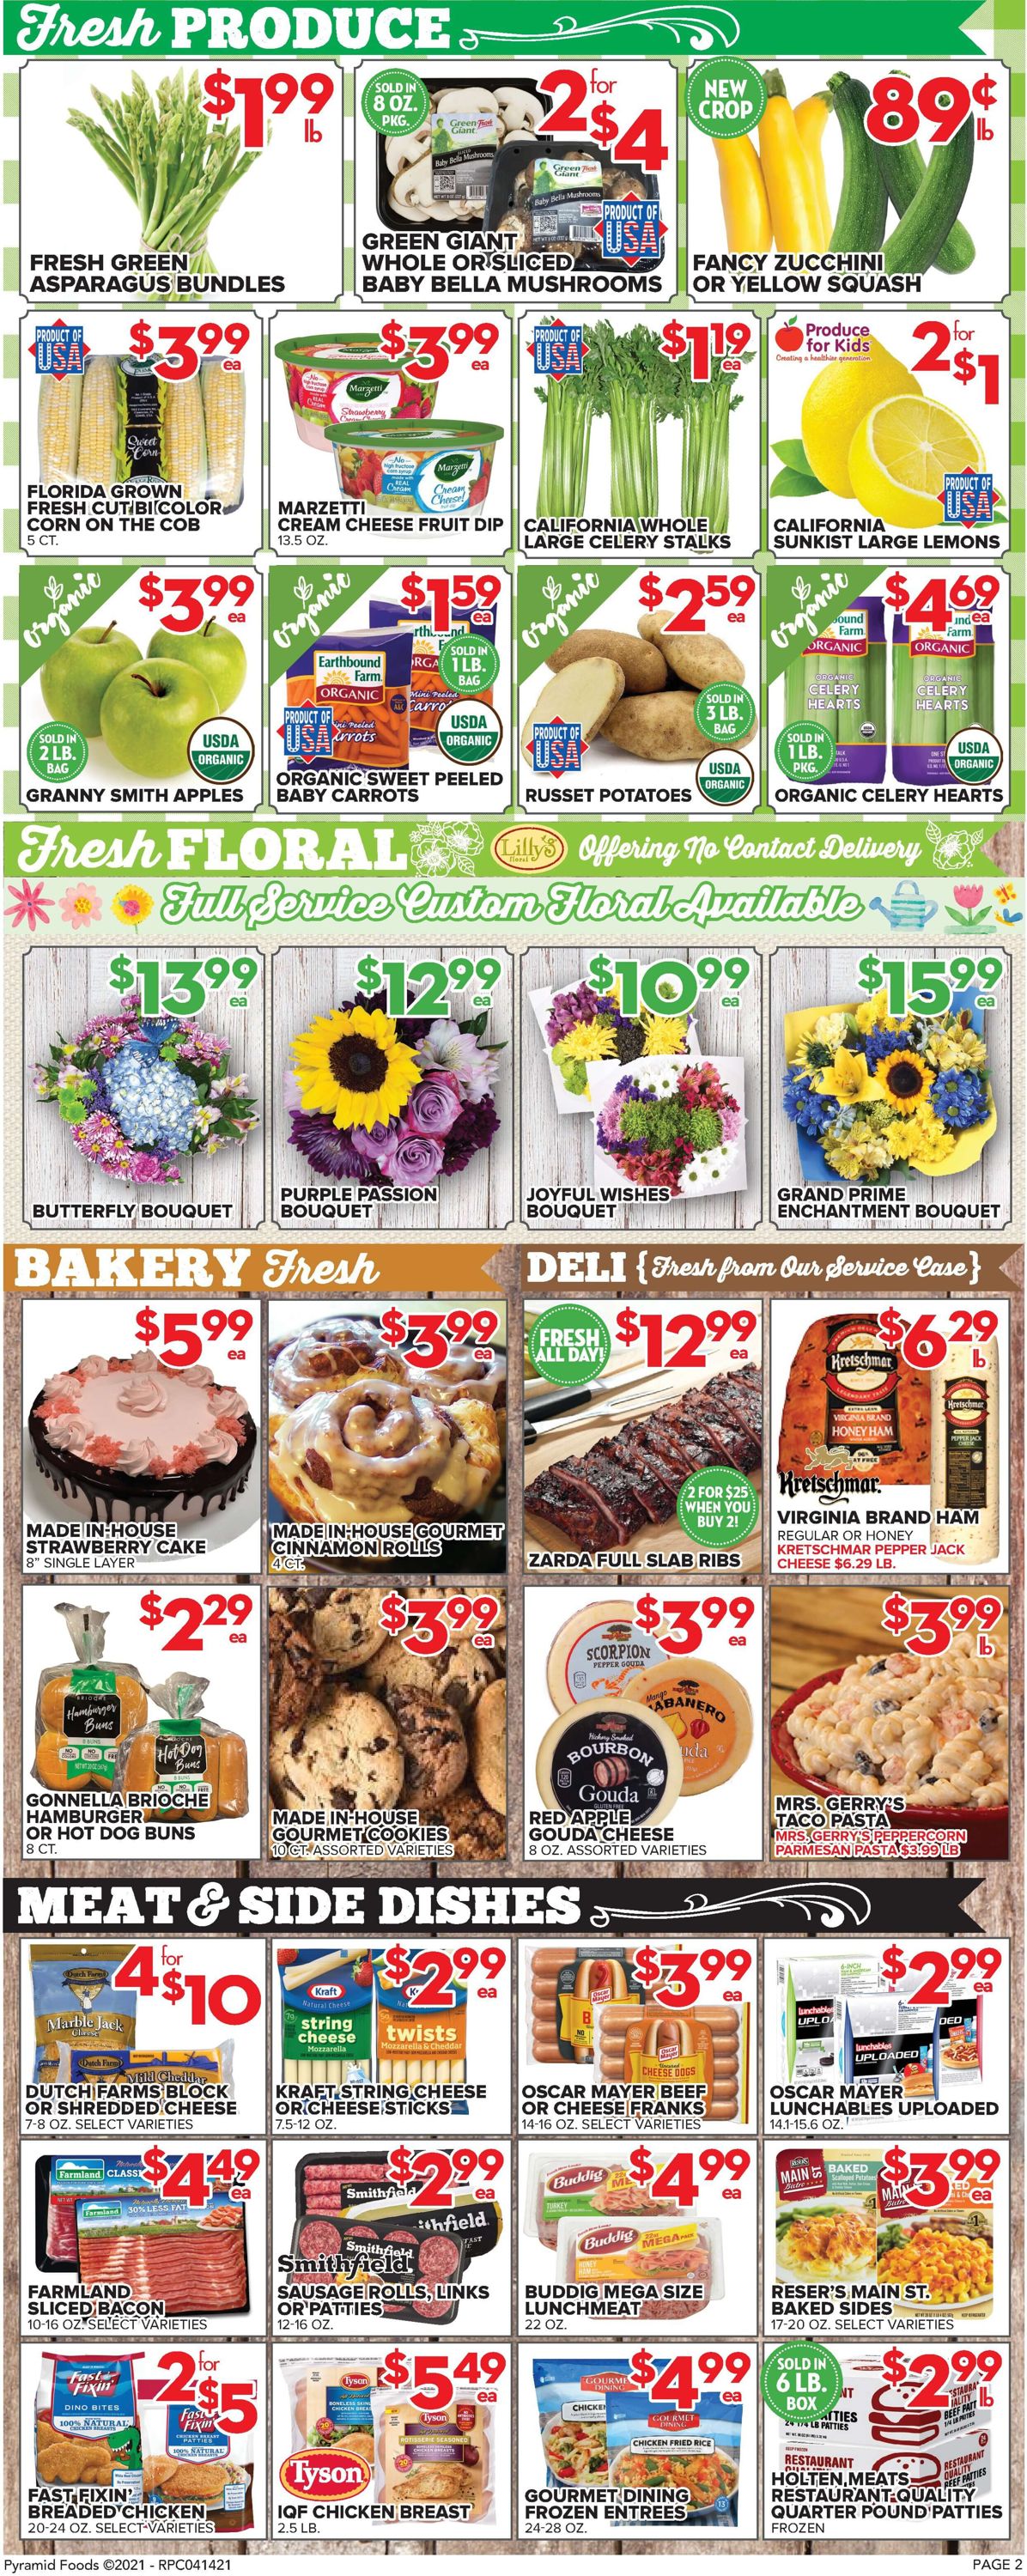 Price Cutter Weekly Ad Circular - valid 04/14-04/20/2021 (Page 2)